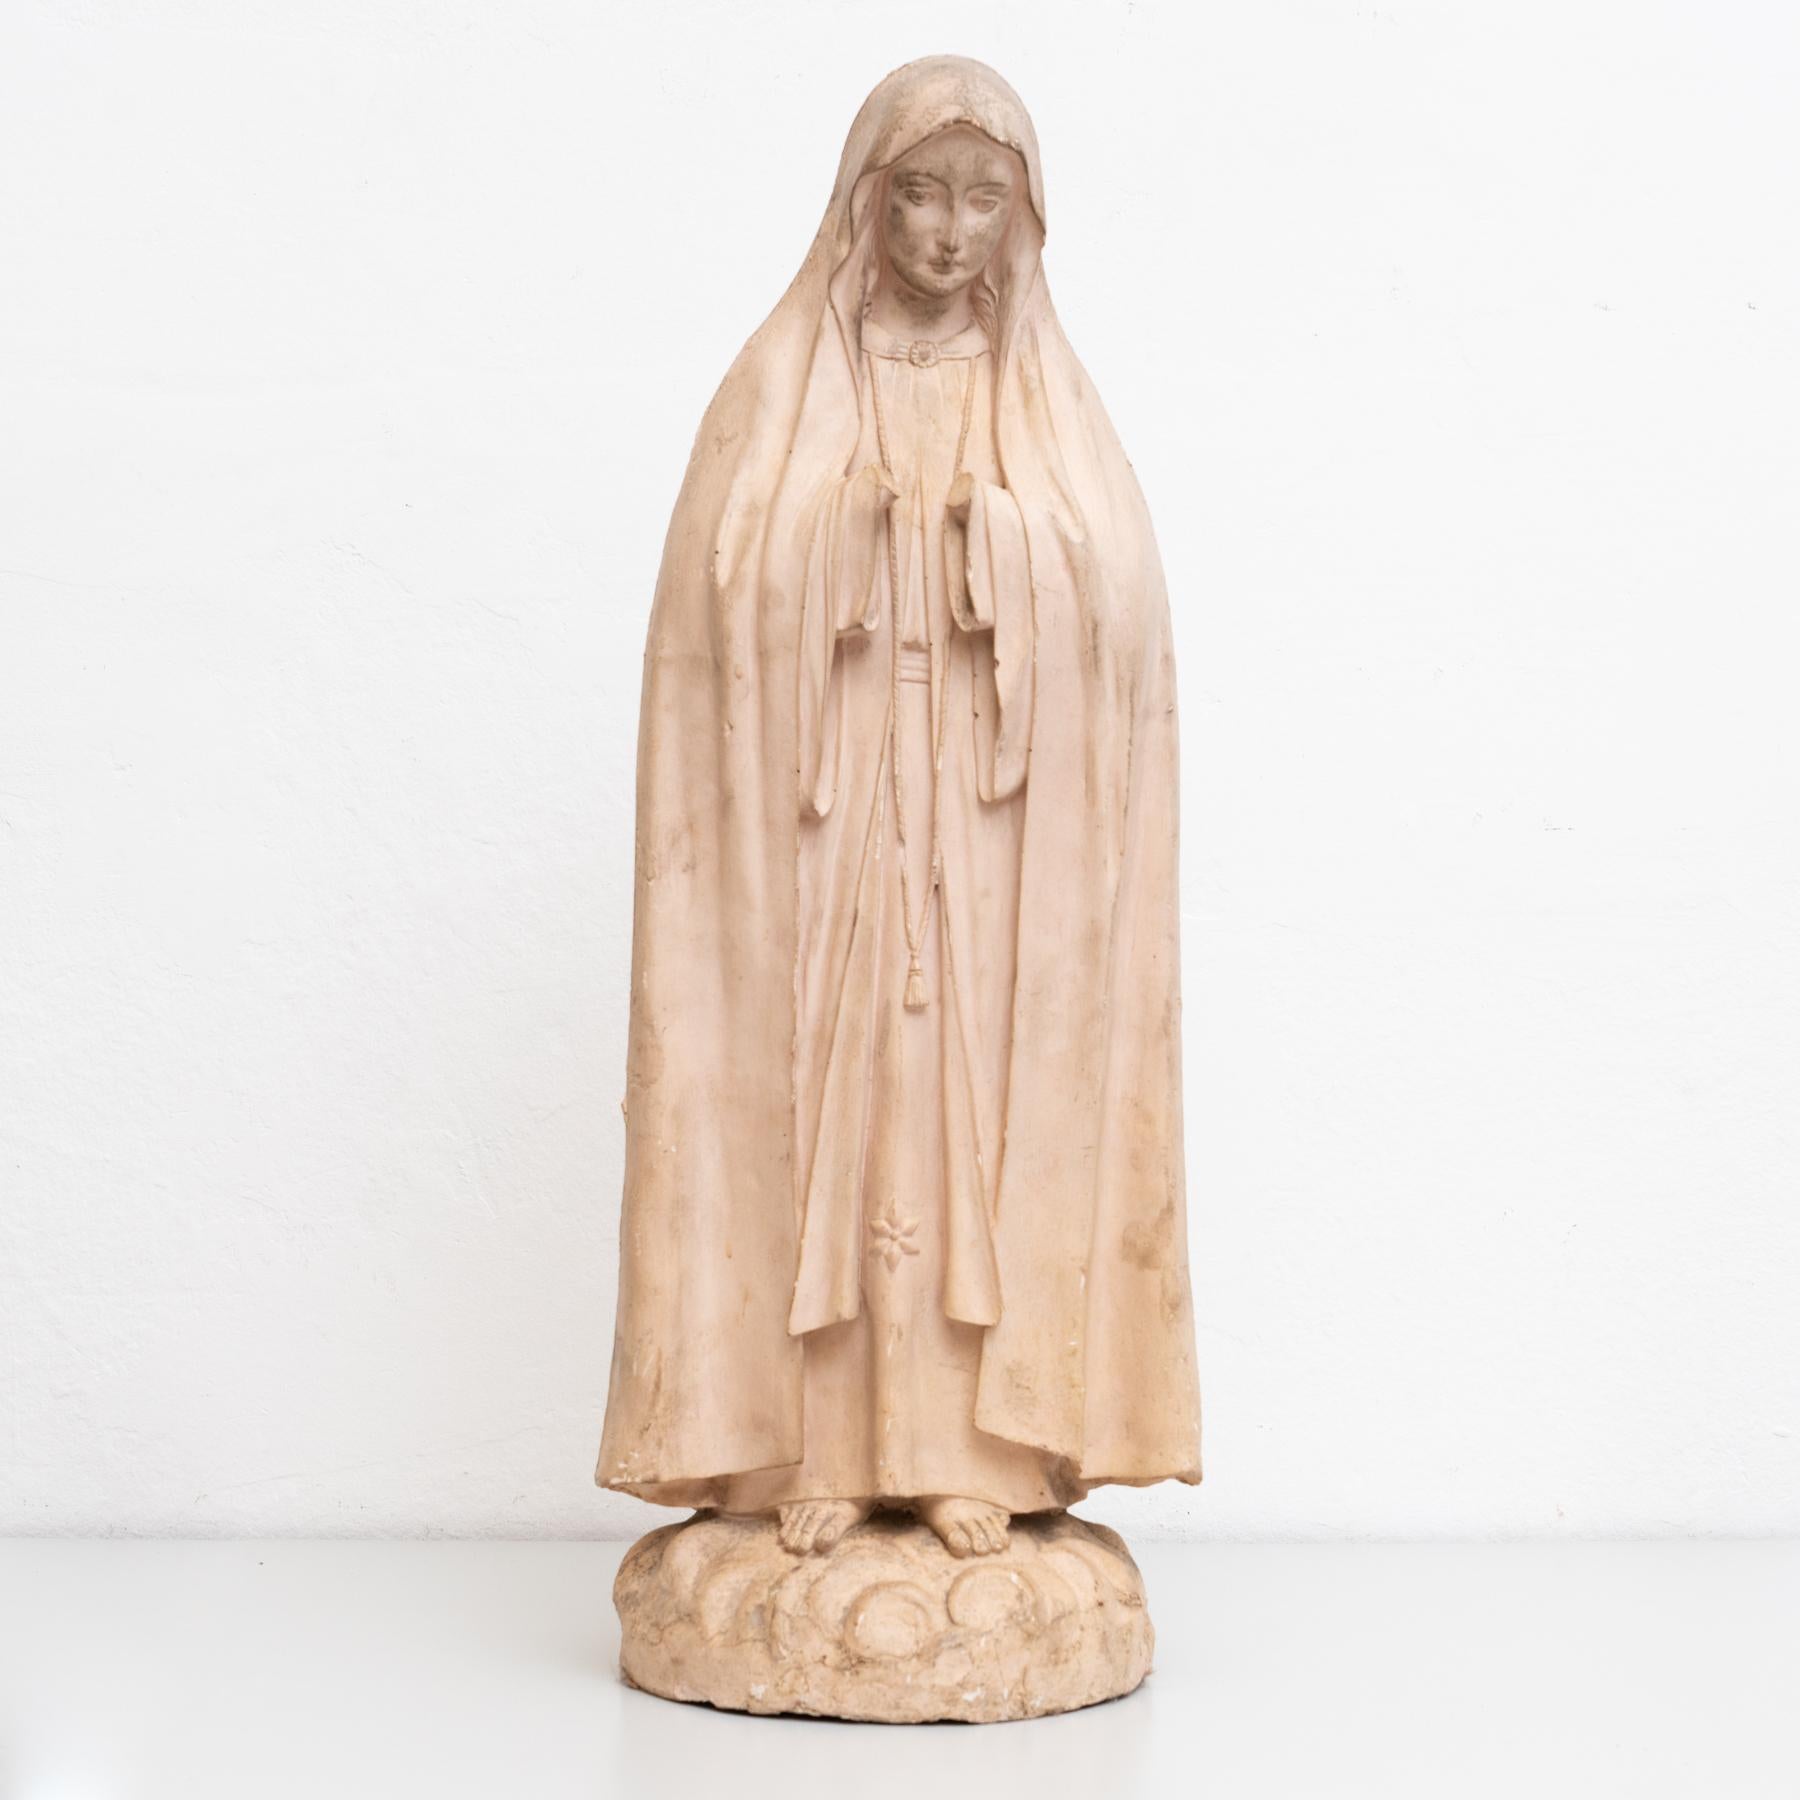 Traditional religious plaster figure of a virgin.

Made in traditional Catalan atelier in Olot, Spain, circa 1950.

In original condition, with minor wear consistent with age and use, preserving a beautiful patina.

Materials:
Plaster.
 